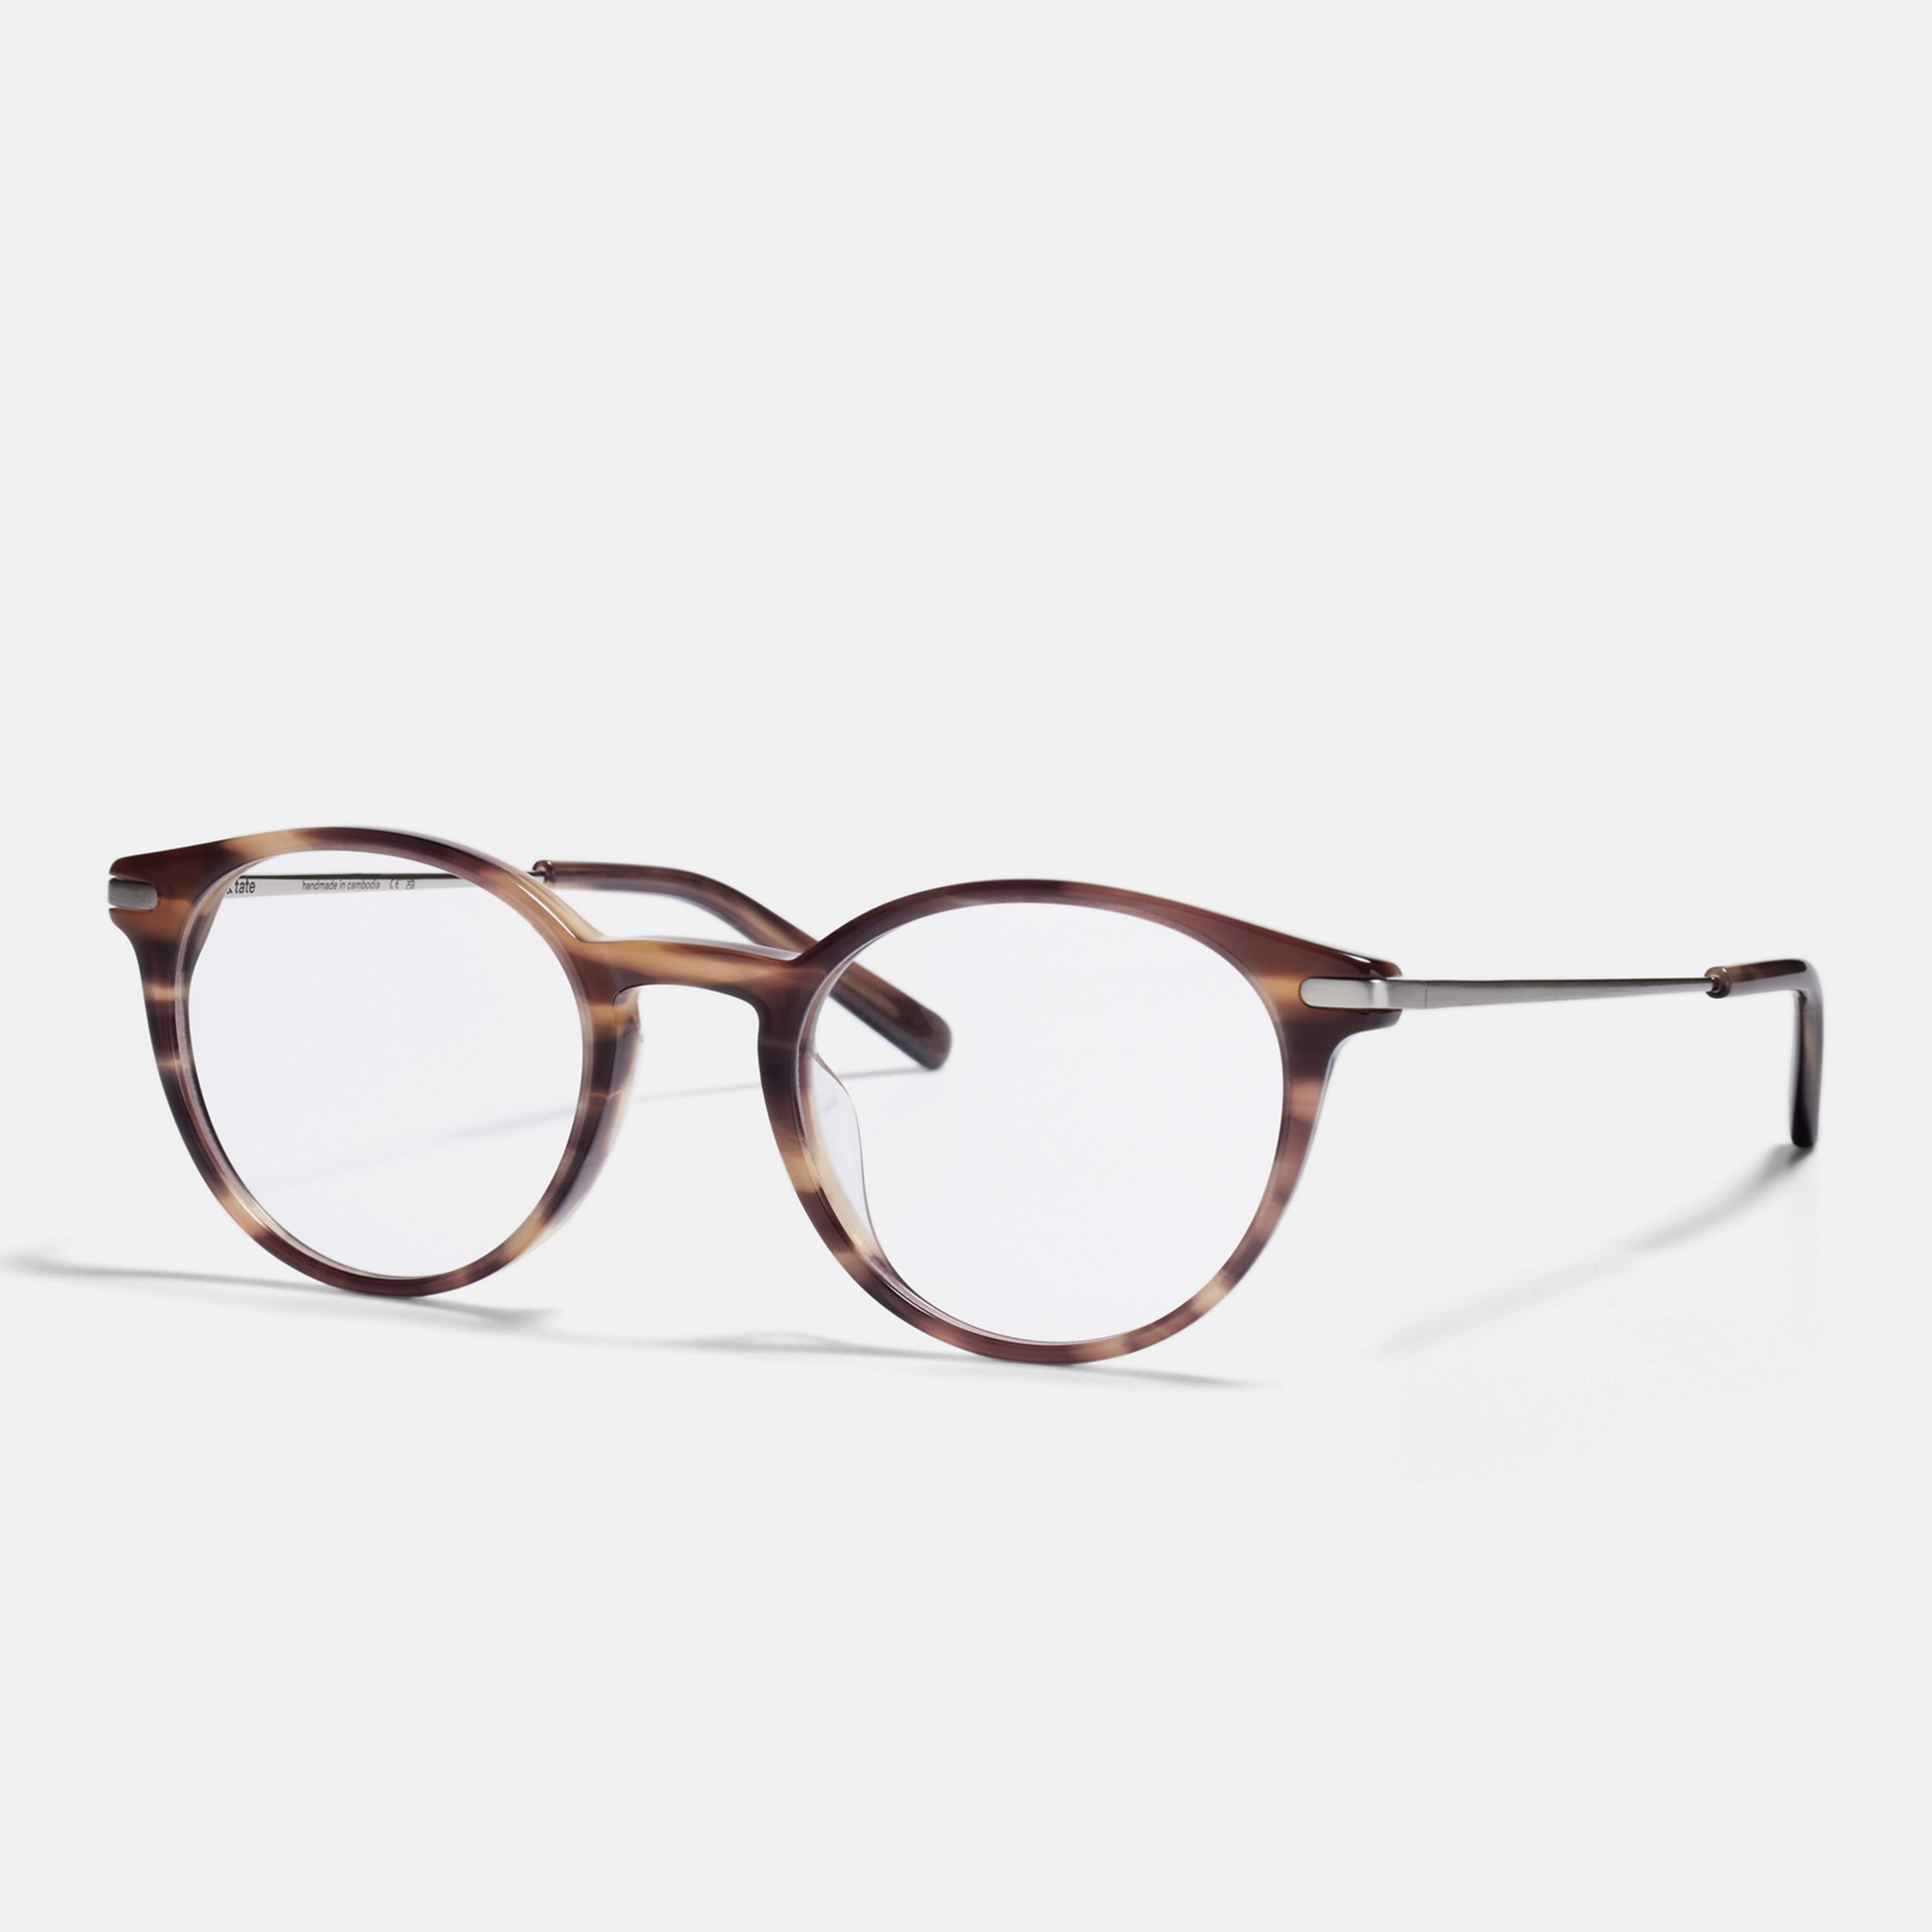 Ace & Tate Optiques | ronde Acétate in Beige, Marron